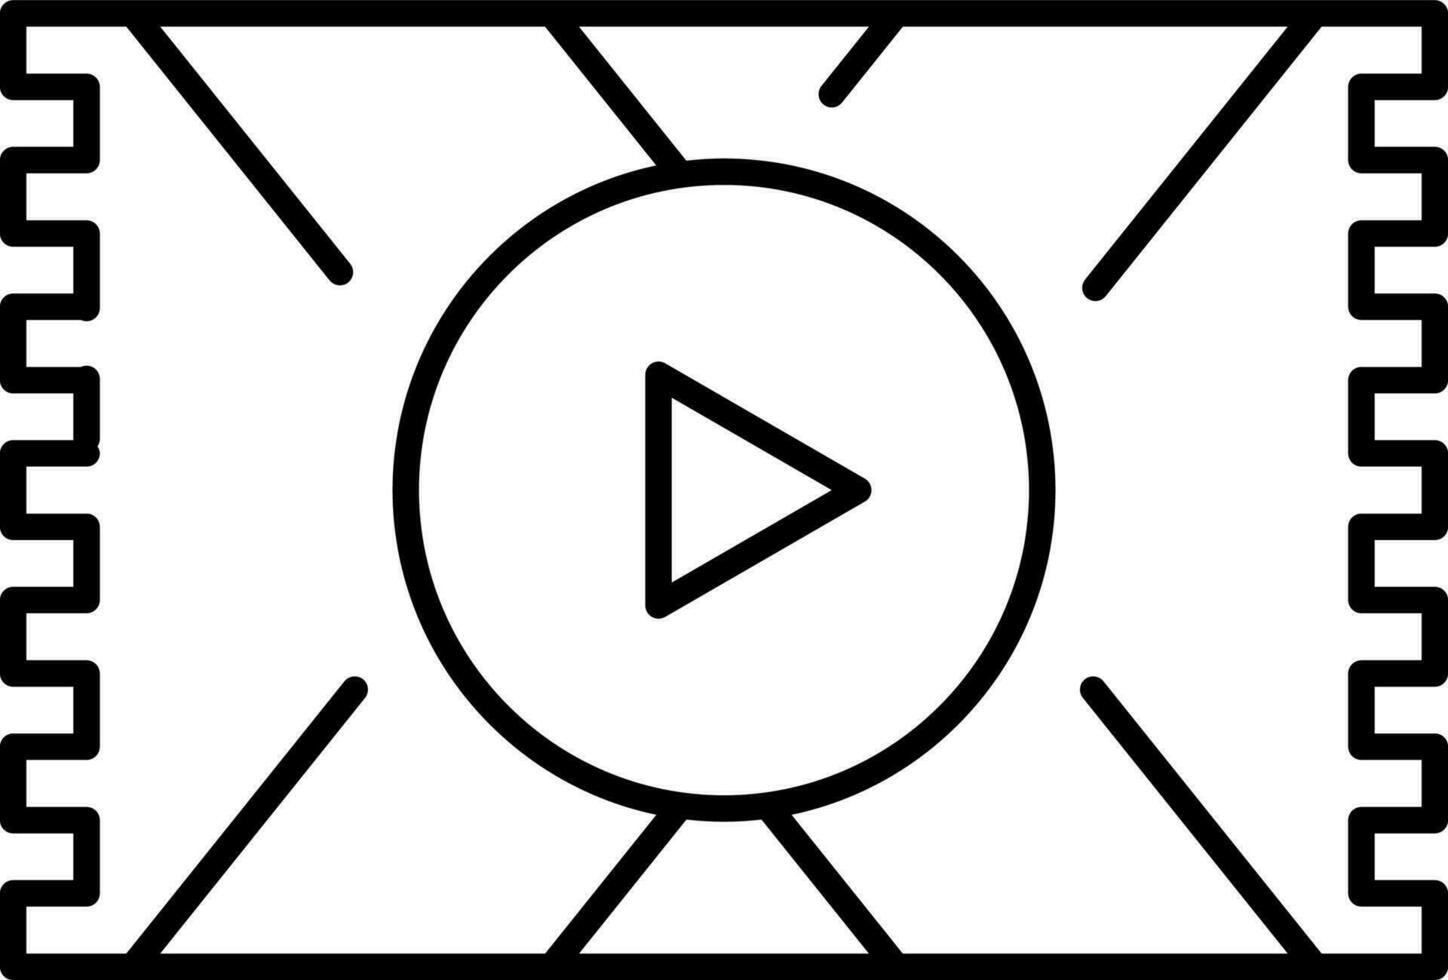 Video play strip icon in line art. vector